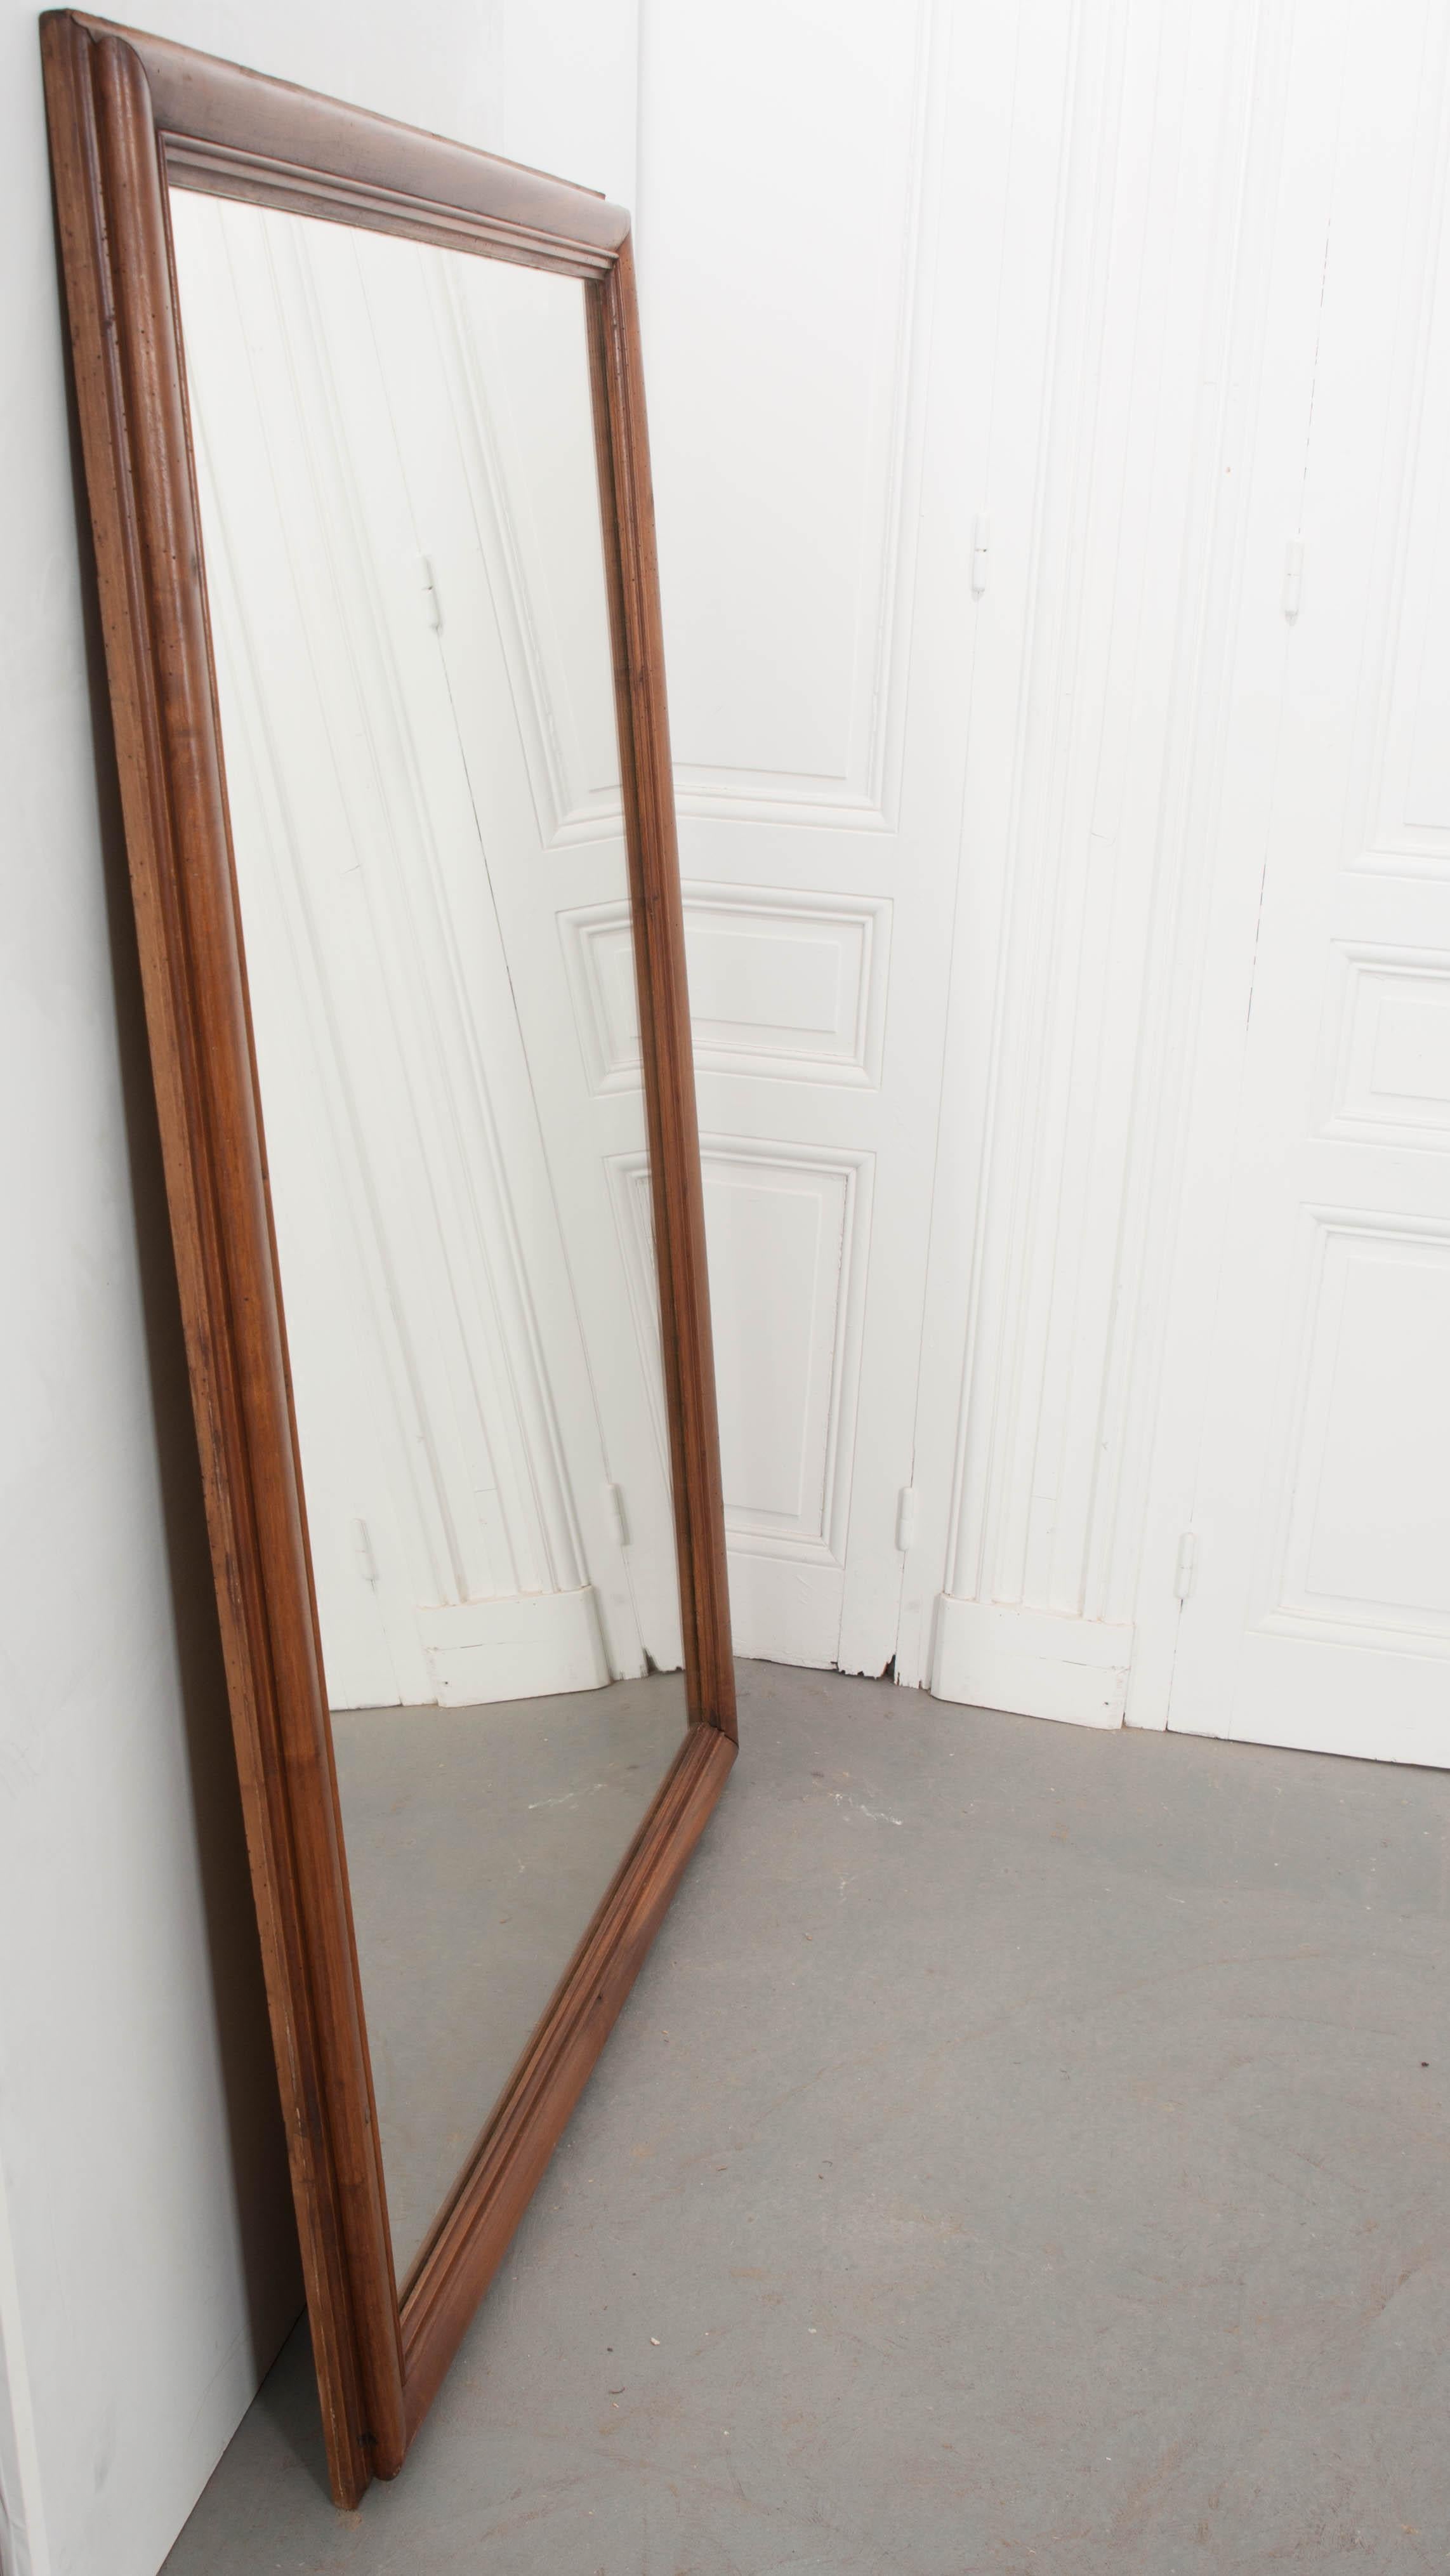 Late 19th Century Provincial Carved Walnut Mirror In Good Condition For Sale In Baton Rouge, LA